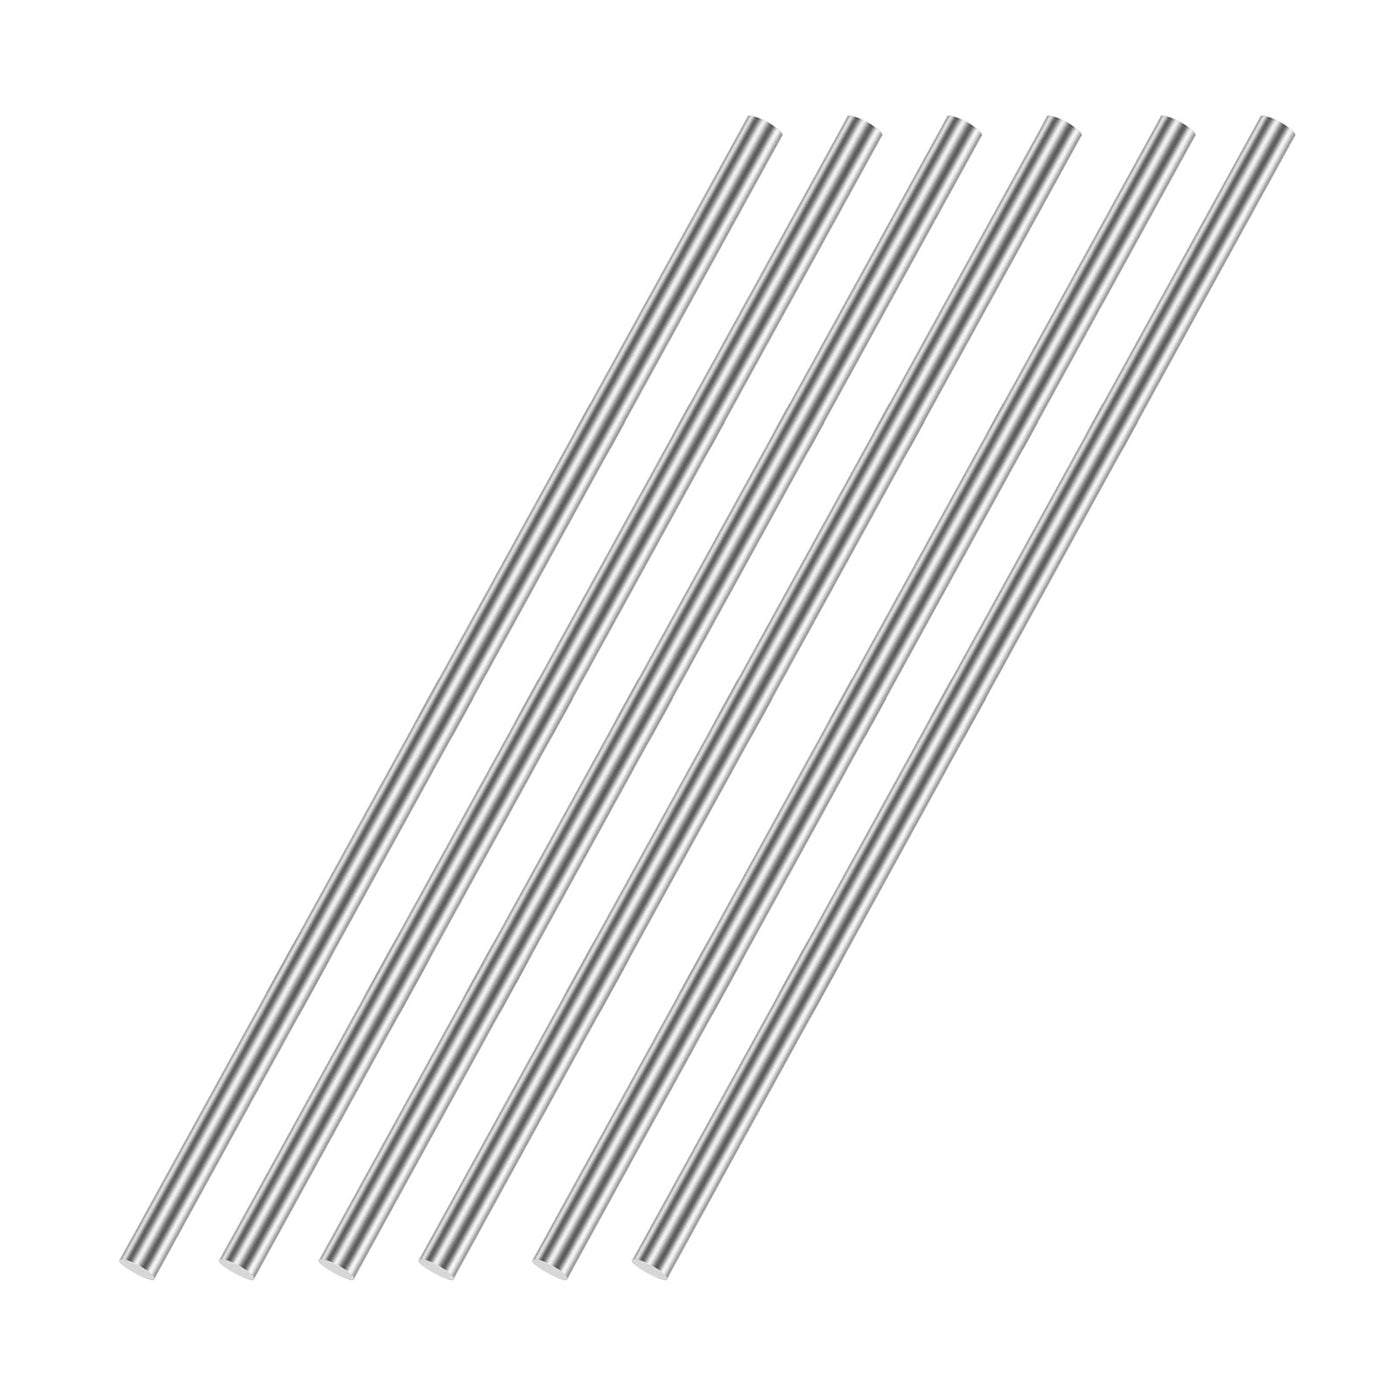 uxcell Uxcell 3mm x 100mm(1/8" x 4") 304 Stainless Steel Solid Round Rod for DIY Craft - 6pcs